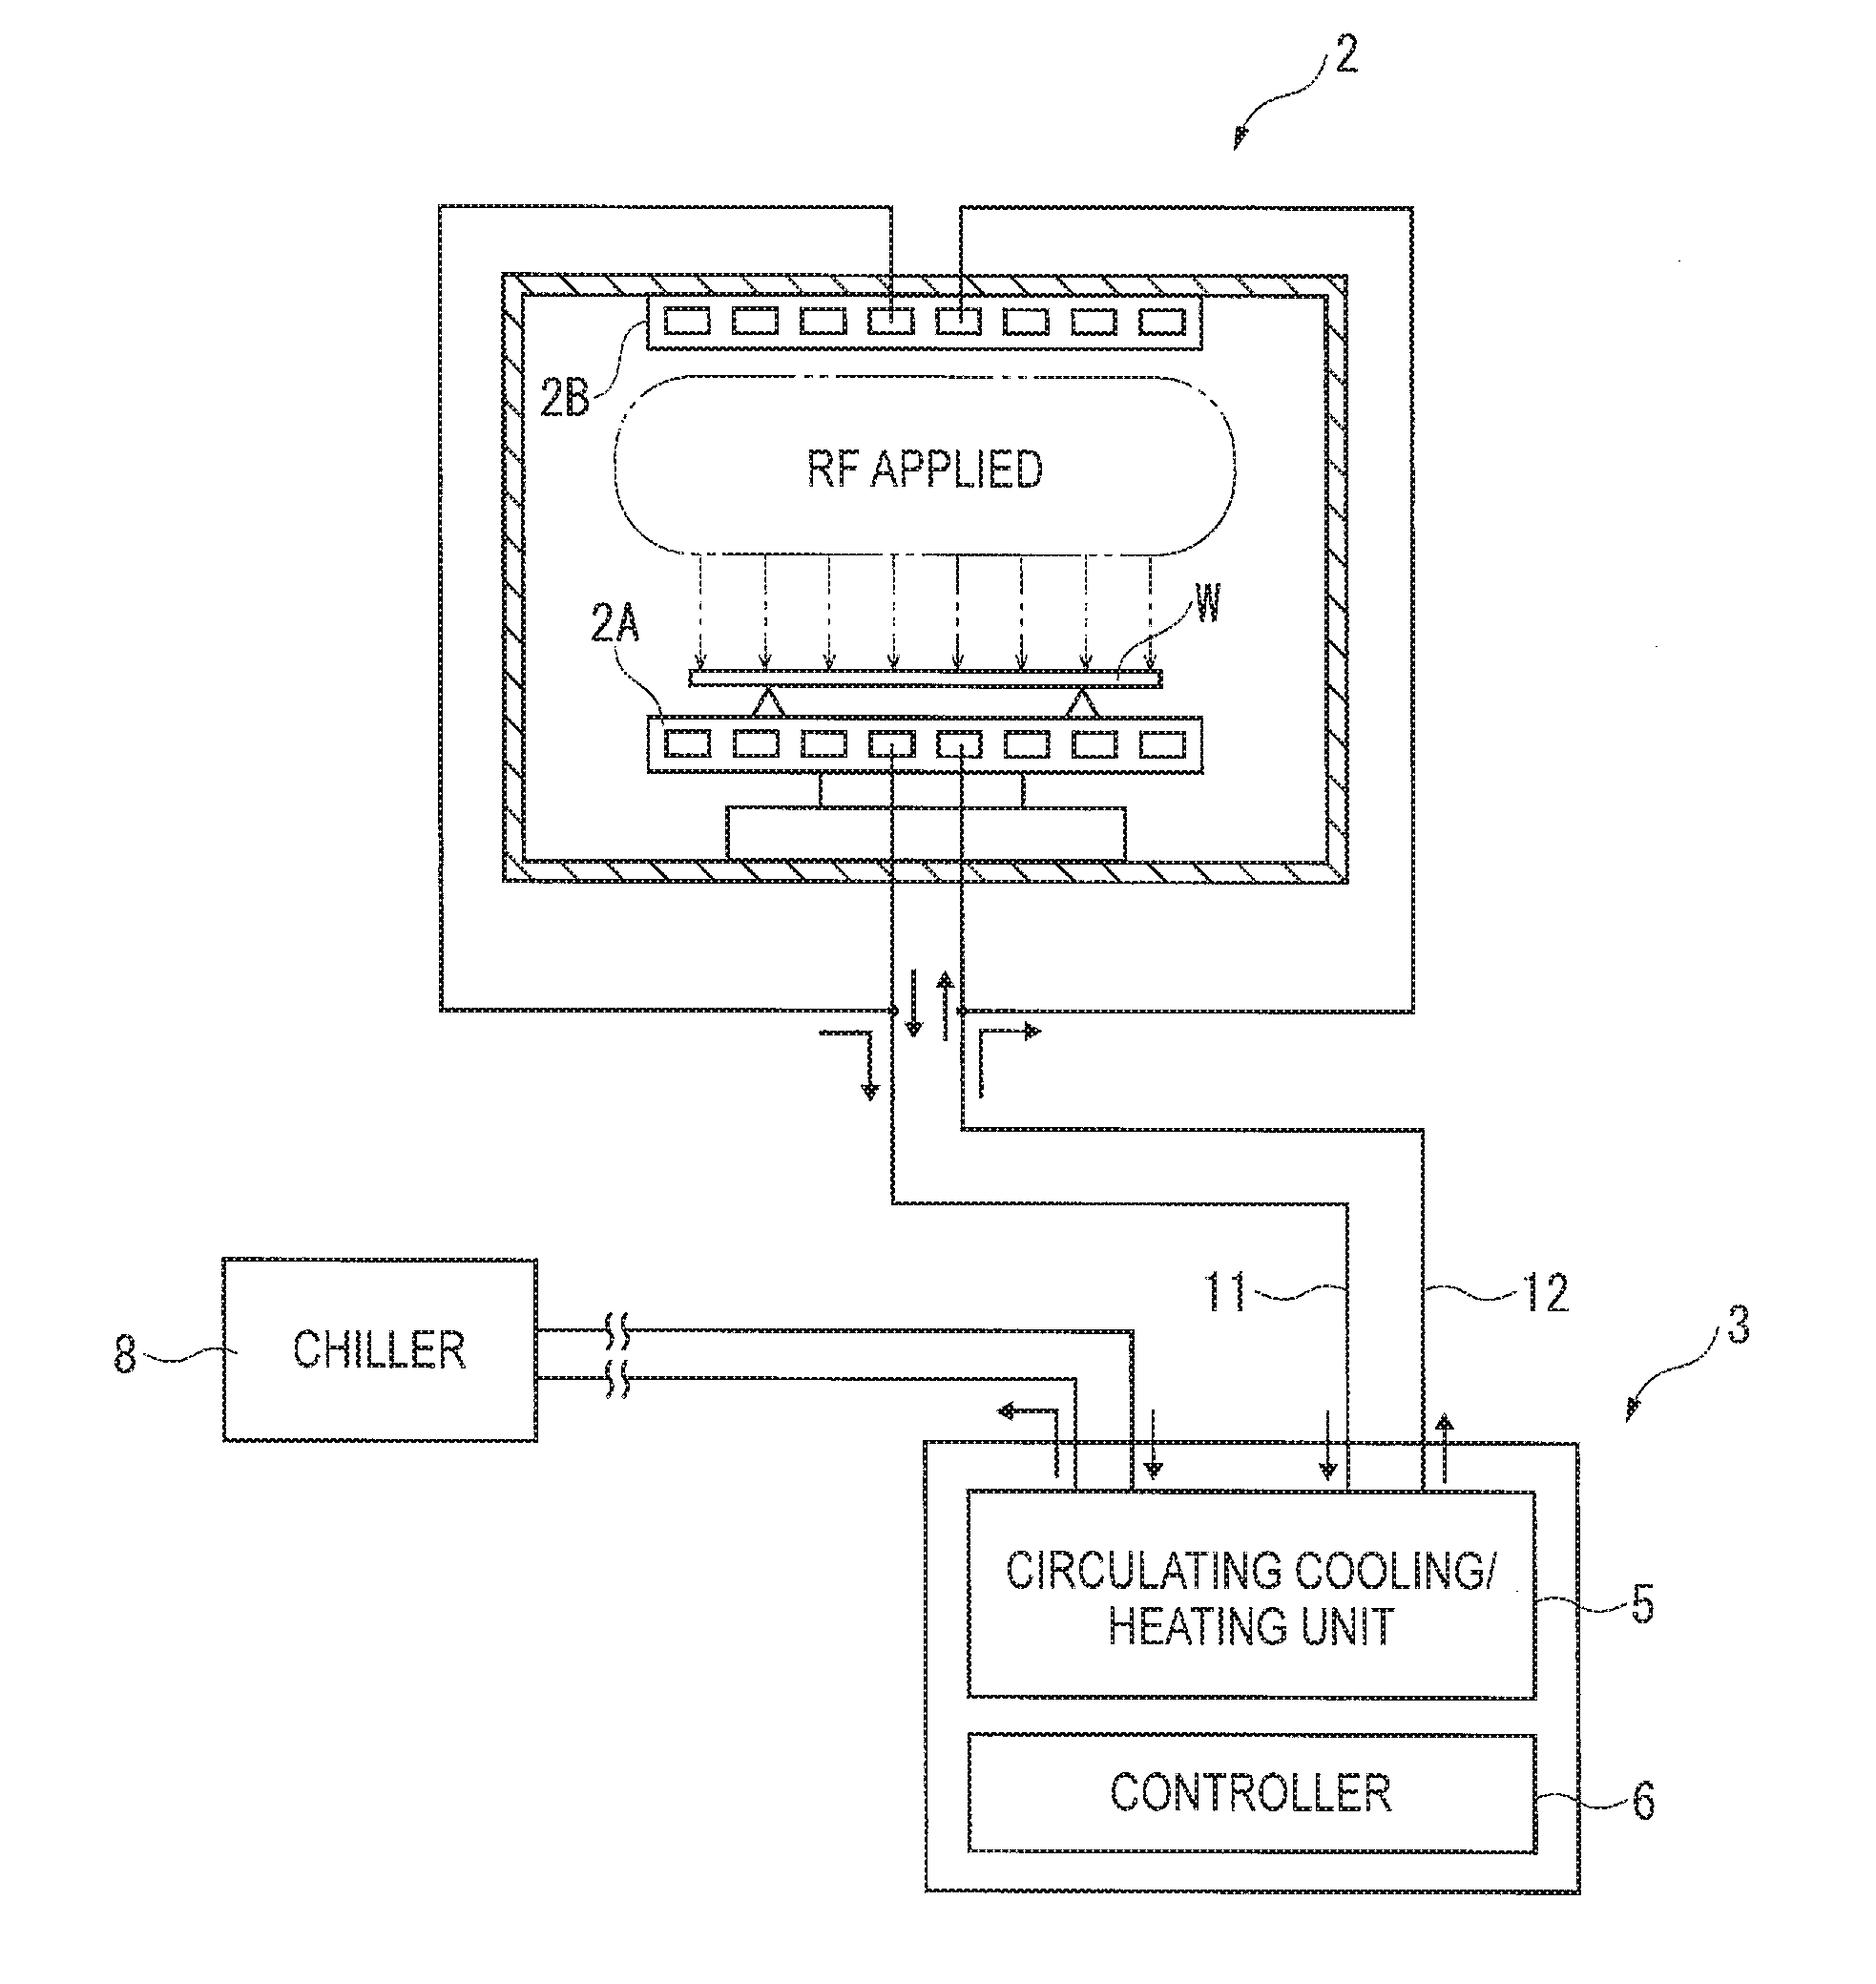 Circulation cooling and heating device